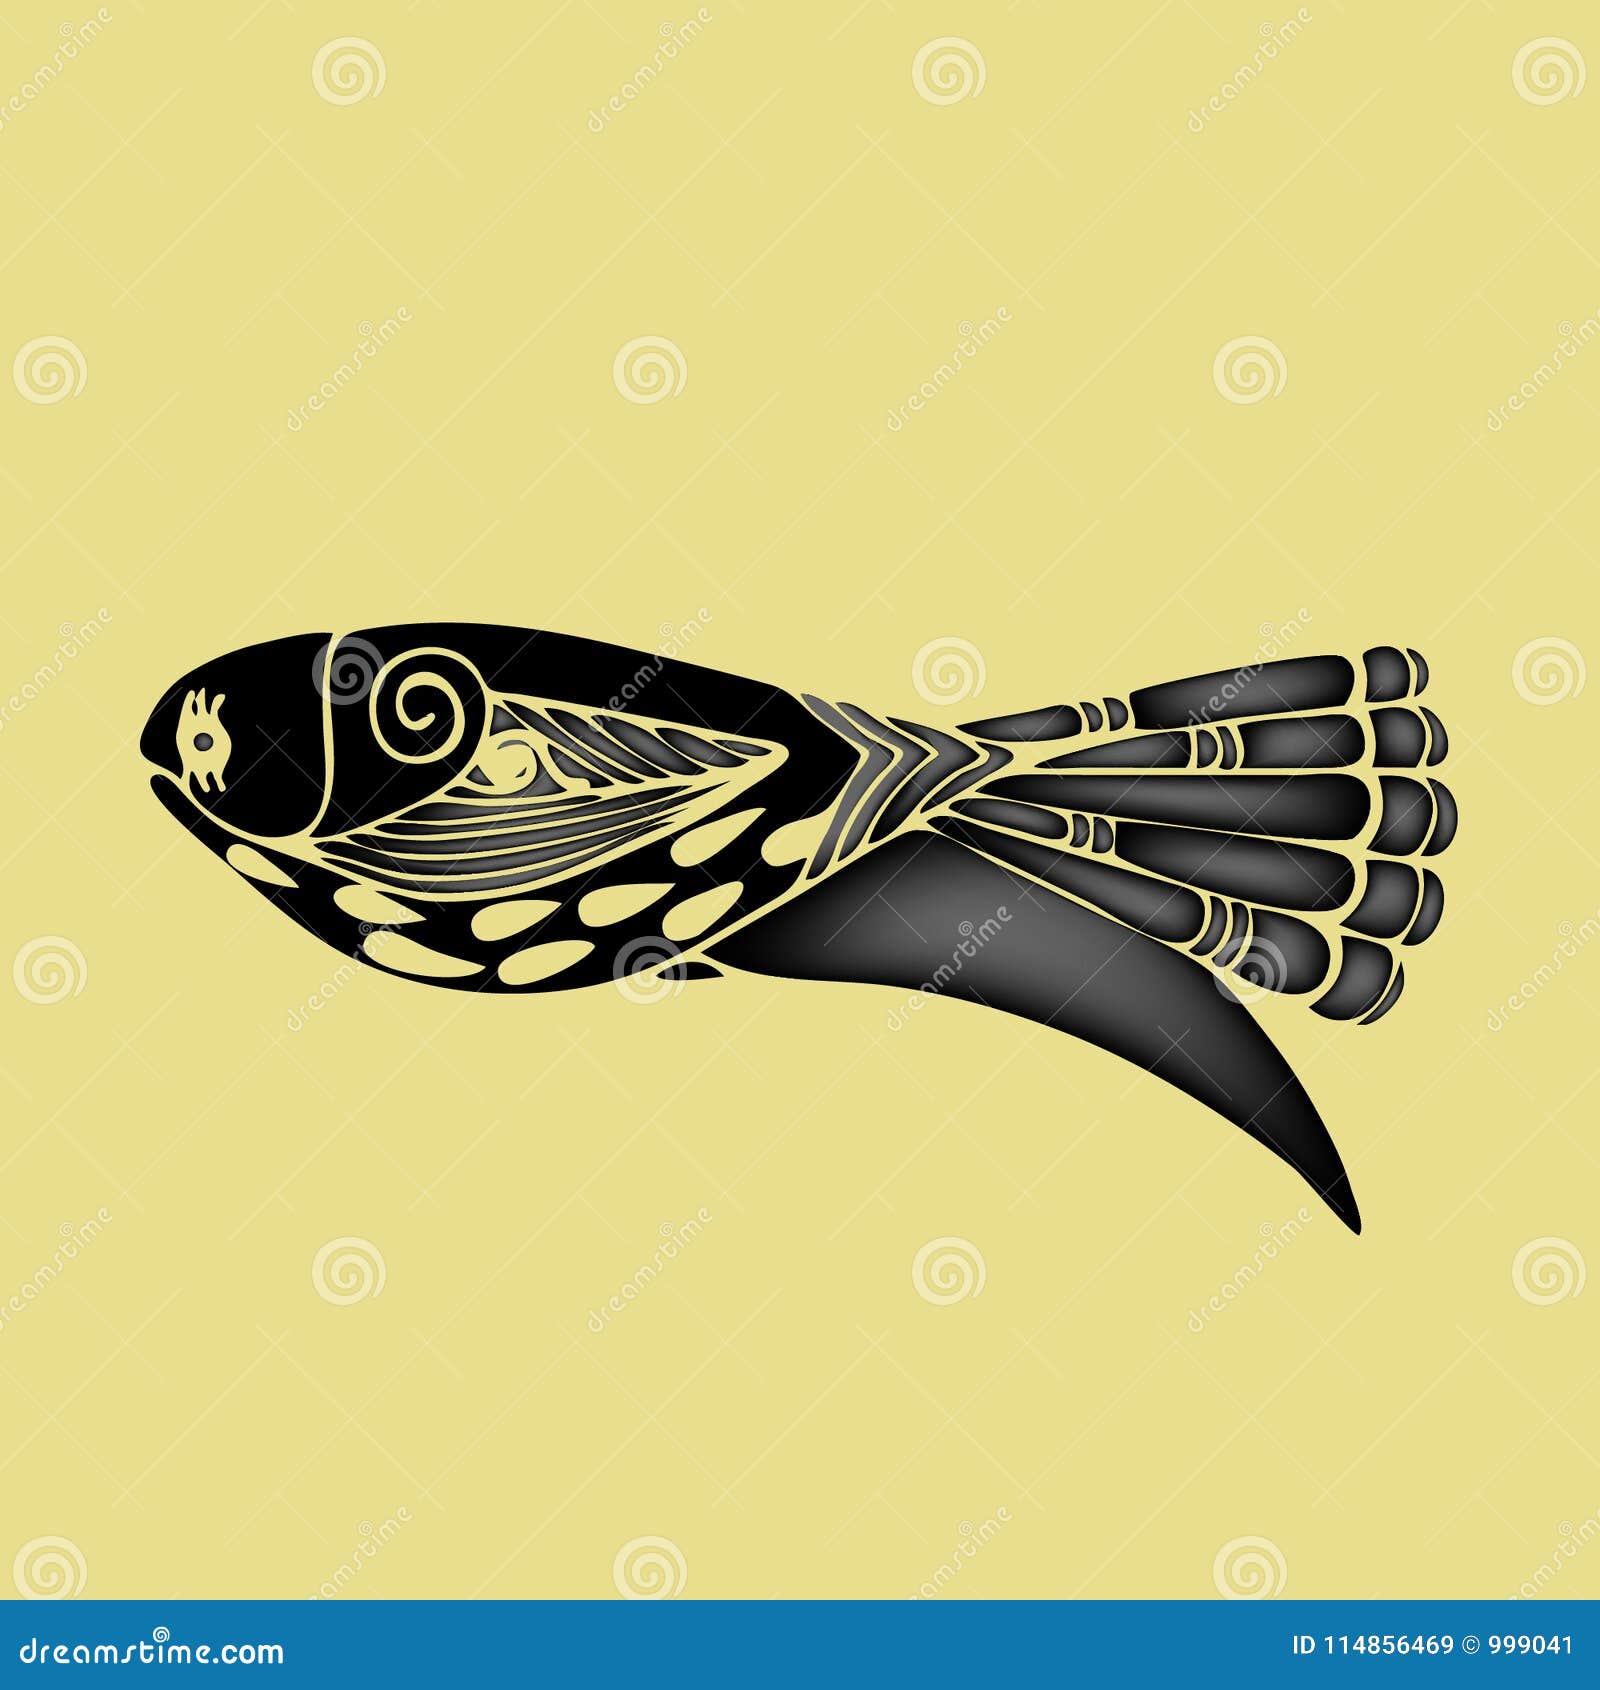 Download Decorative Colored Fish 3d Vector Illustration Eps10 Stock ...